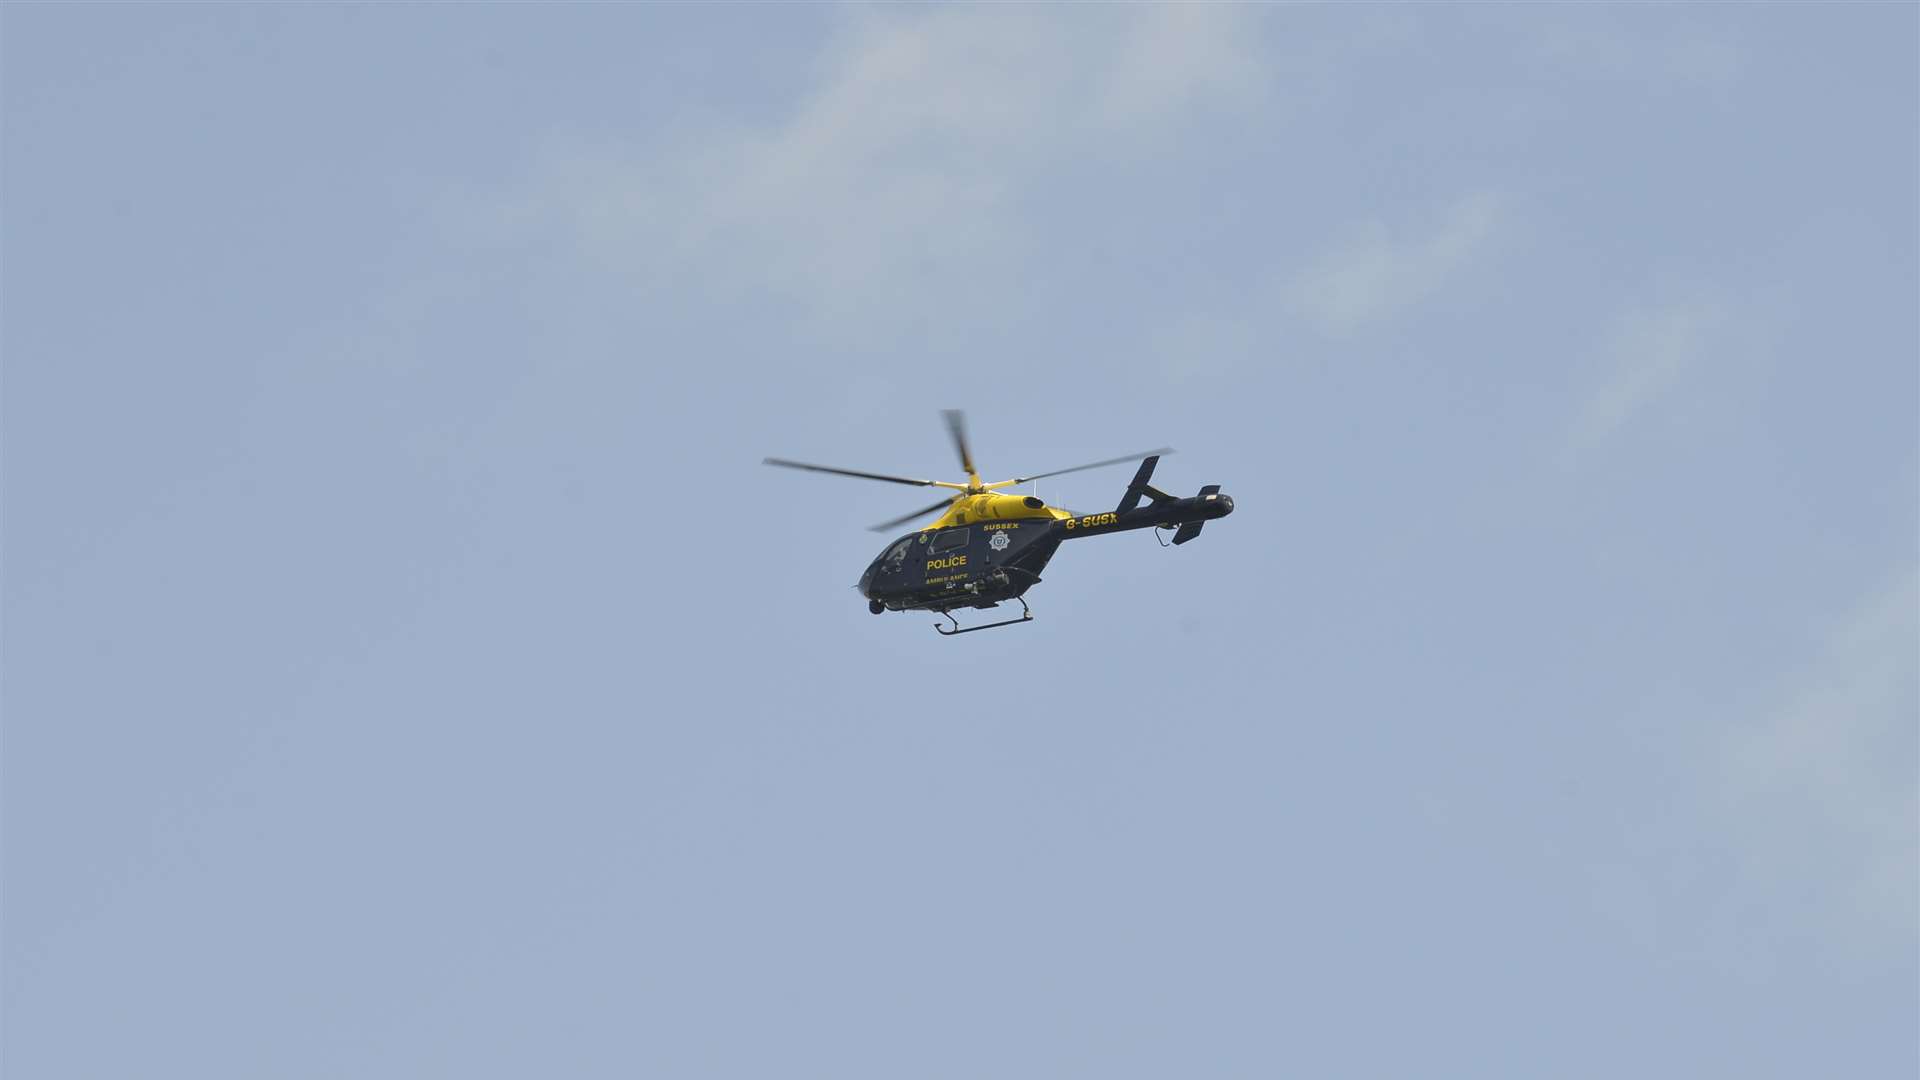 Police helicopter over town